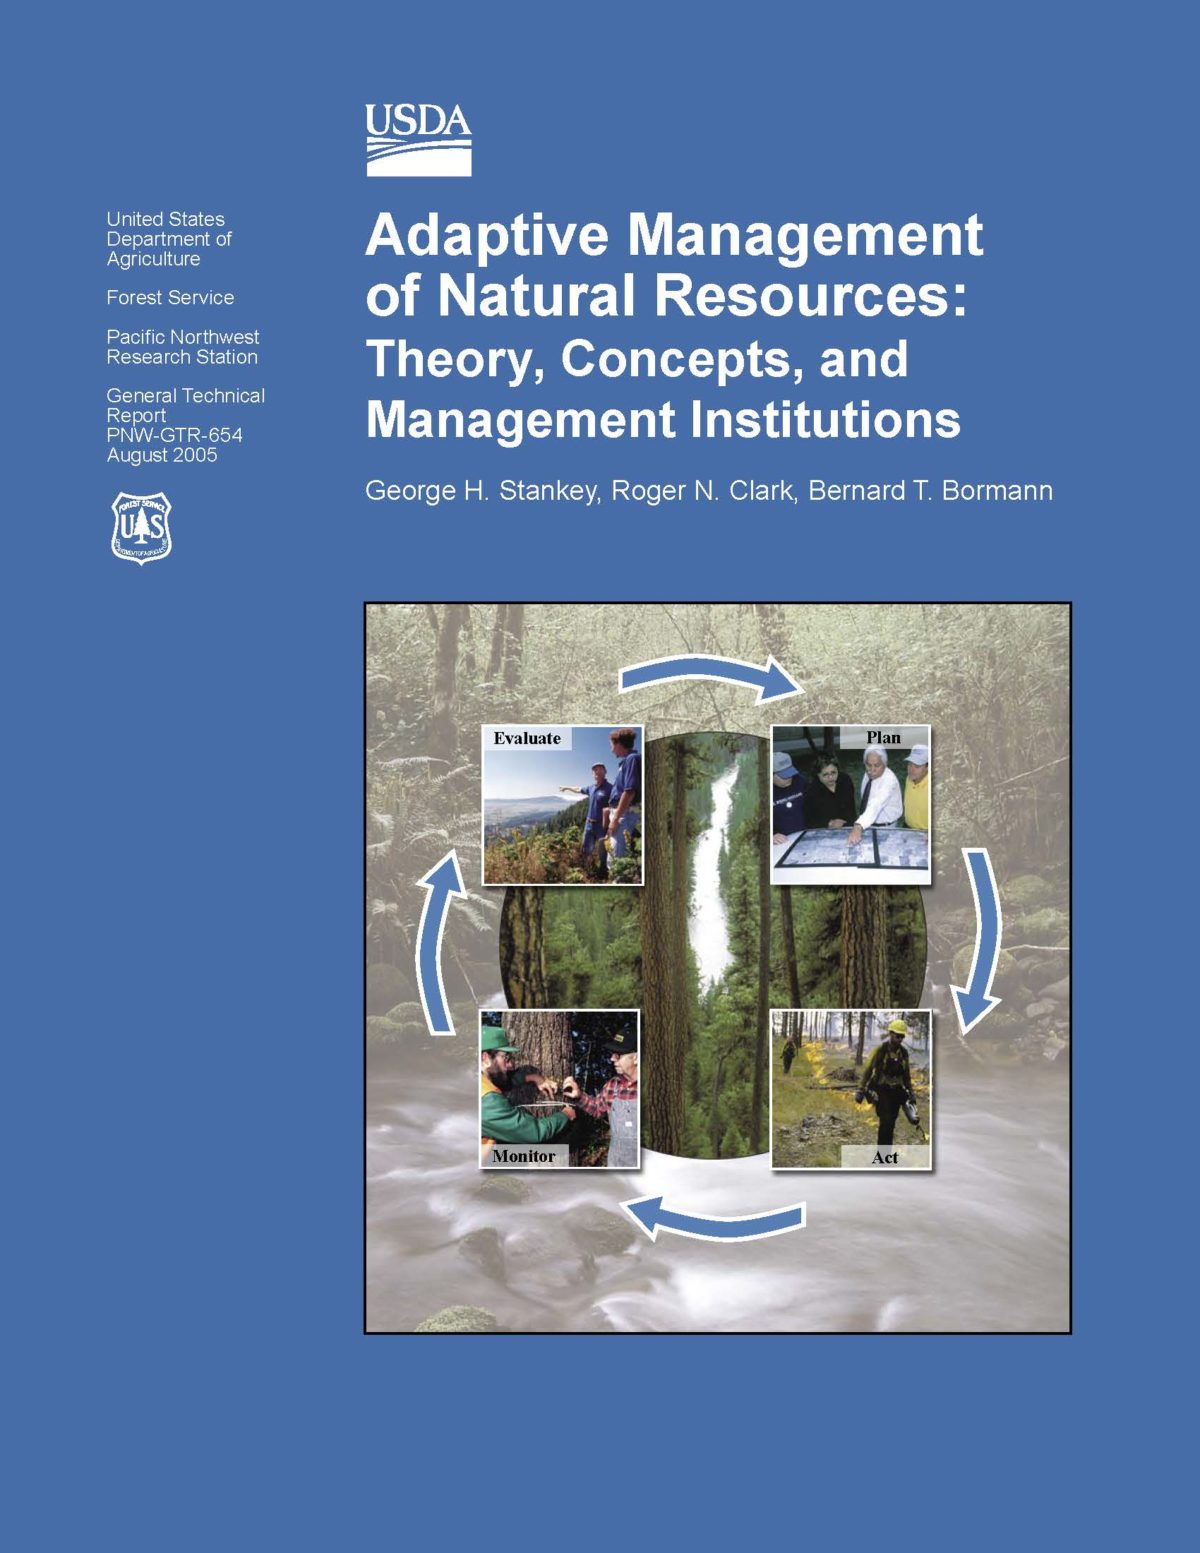 Adaptive Management of Natural Resources: Theory, Concepts, and Management Institutions